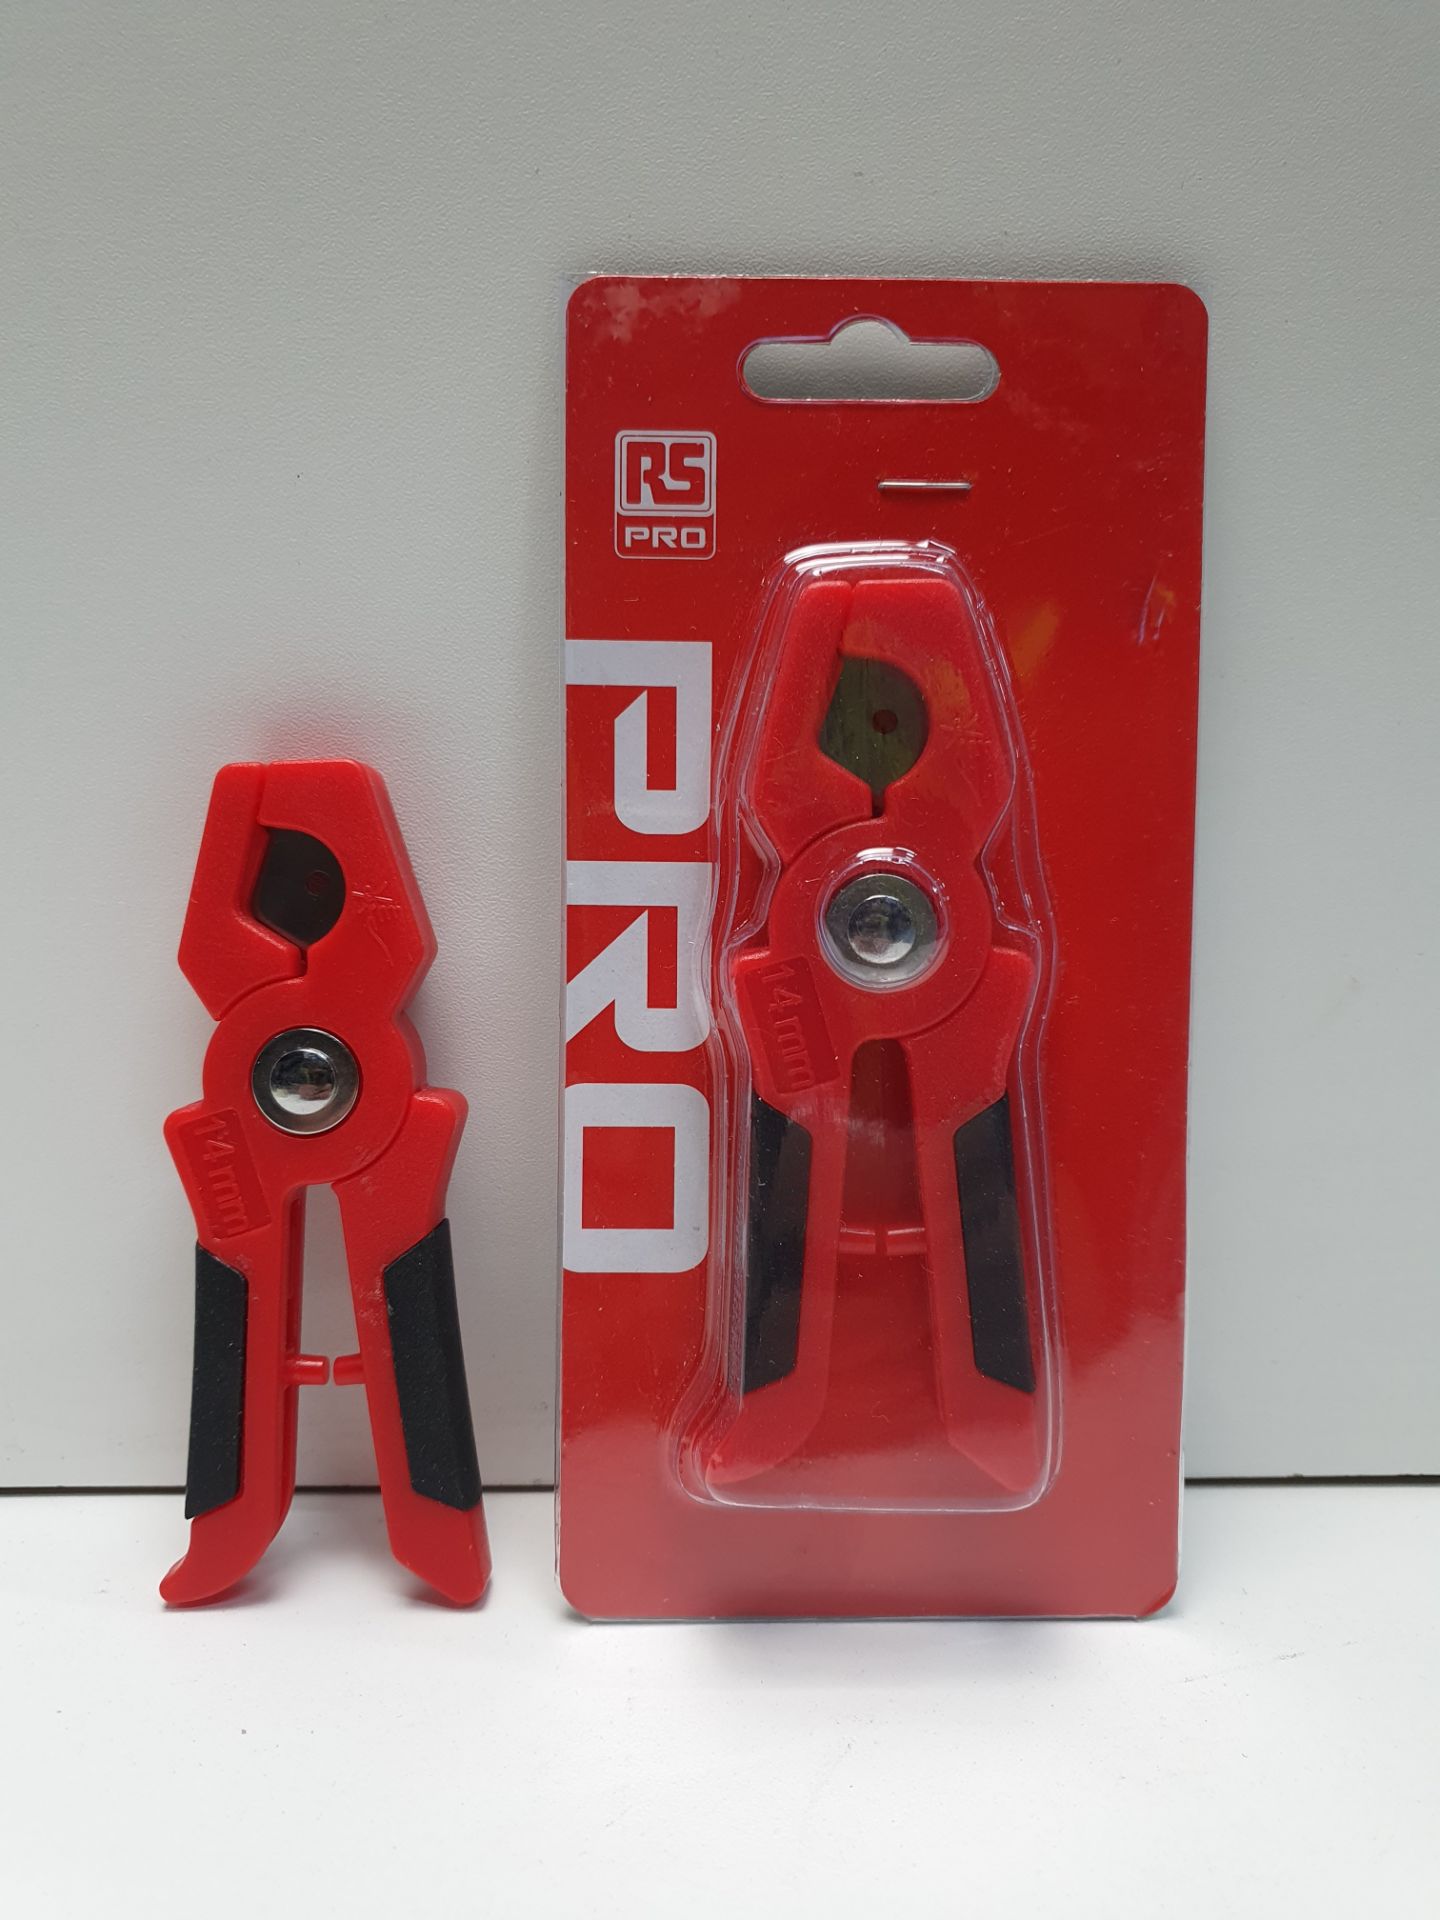 4 Sets of RS PRO Pipe Cutter's 13 mm, Cuts Plastic